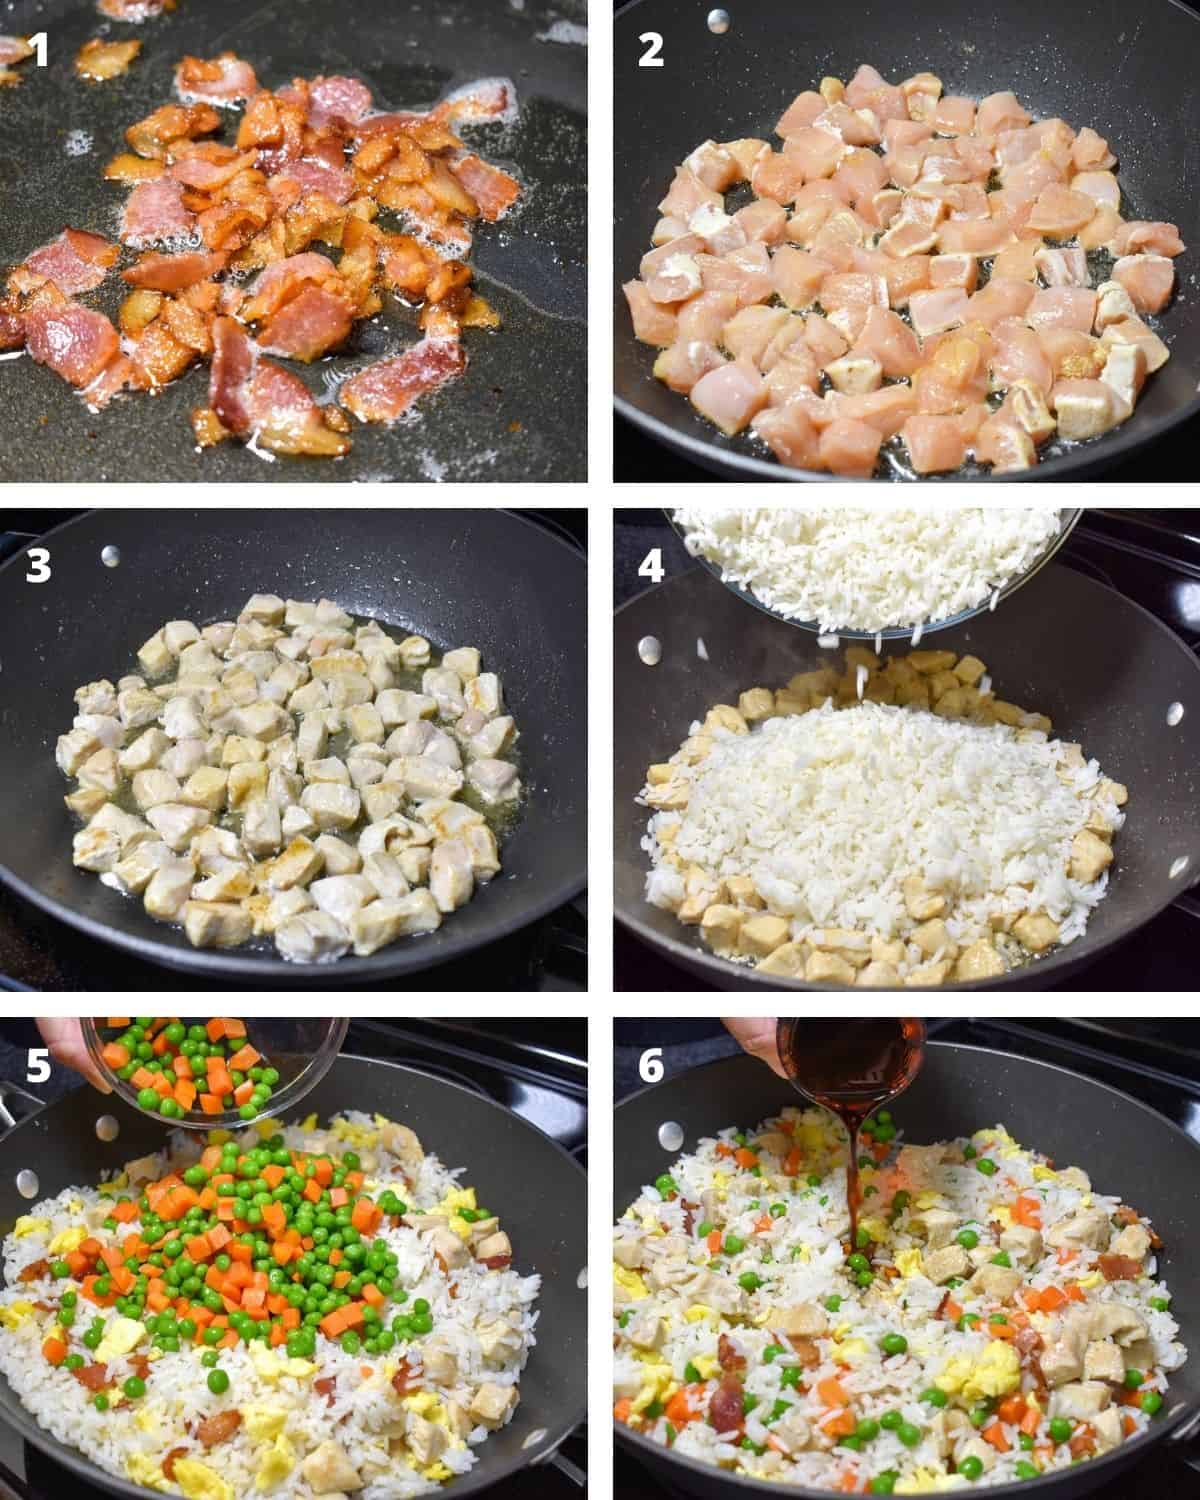 A collage of six images illustrating the steps for making the chicken fried rice.